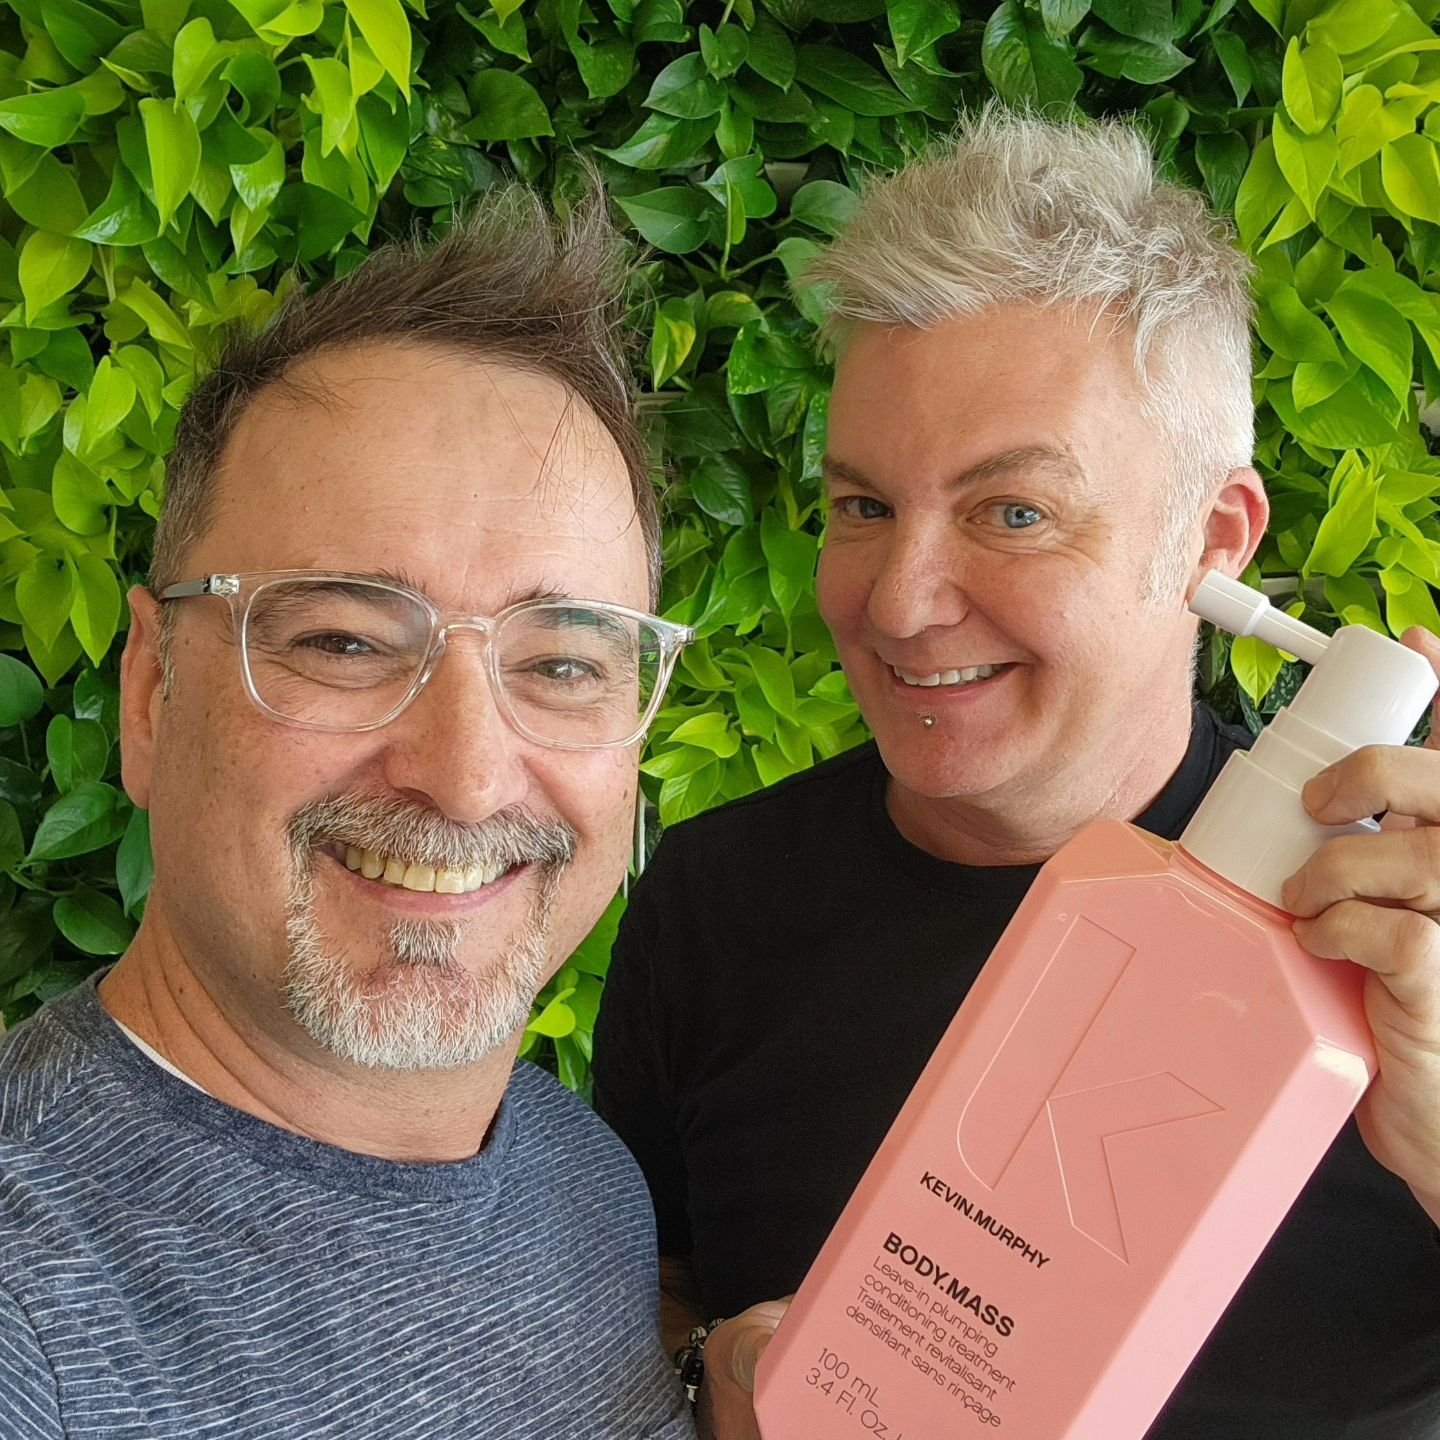 This weekend, Balance Hair Spa owners Biff &amp; Thomas were treated to salon education by Kevin Murphy at their North America headquarters in Salt Lake City. They got to see a behind the scenes look at the brand's photo shoots, got some business cla